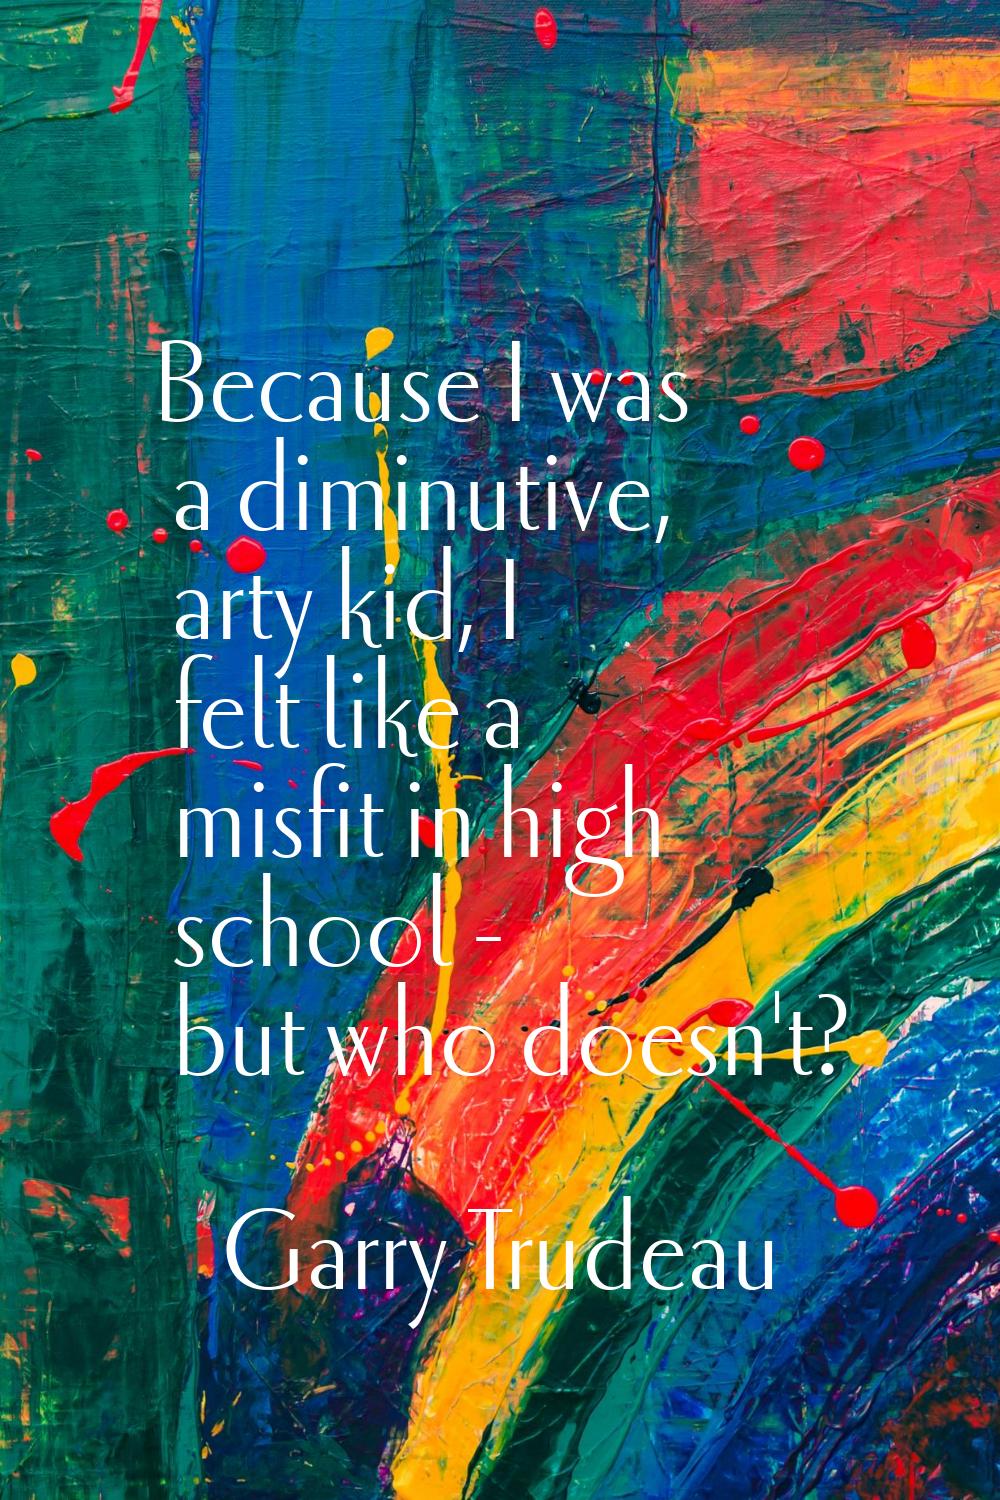 Because I was a diminutive, arty kid, I felt like a misfit in high school - but who doesn't?